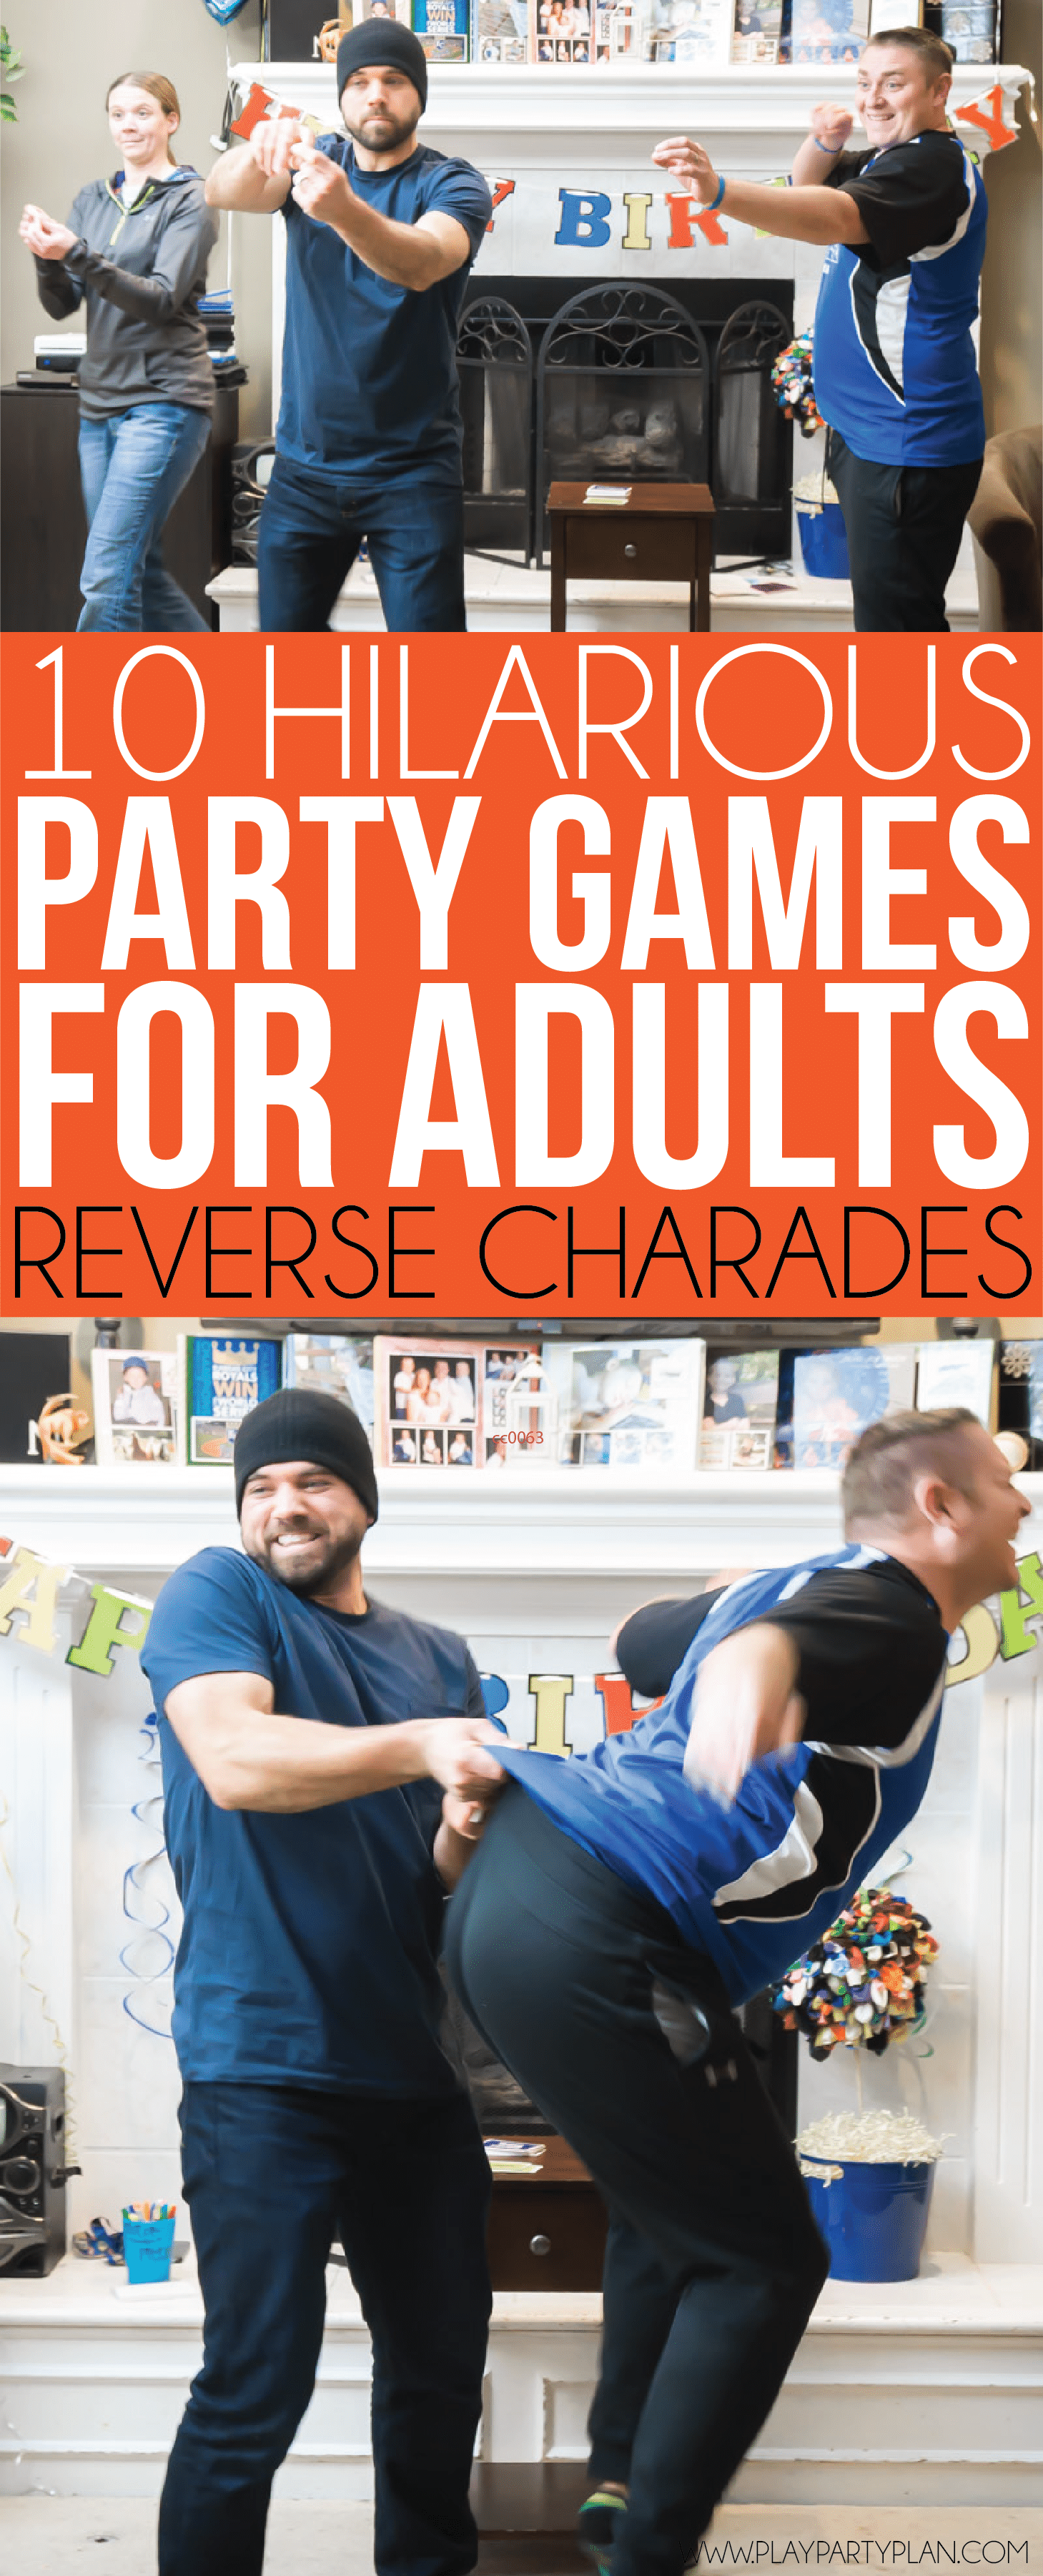 19-hilarious-party-games-for-adults-play-party-plan